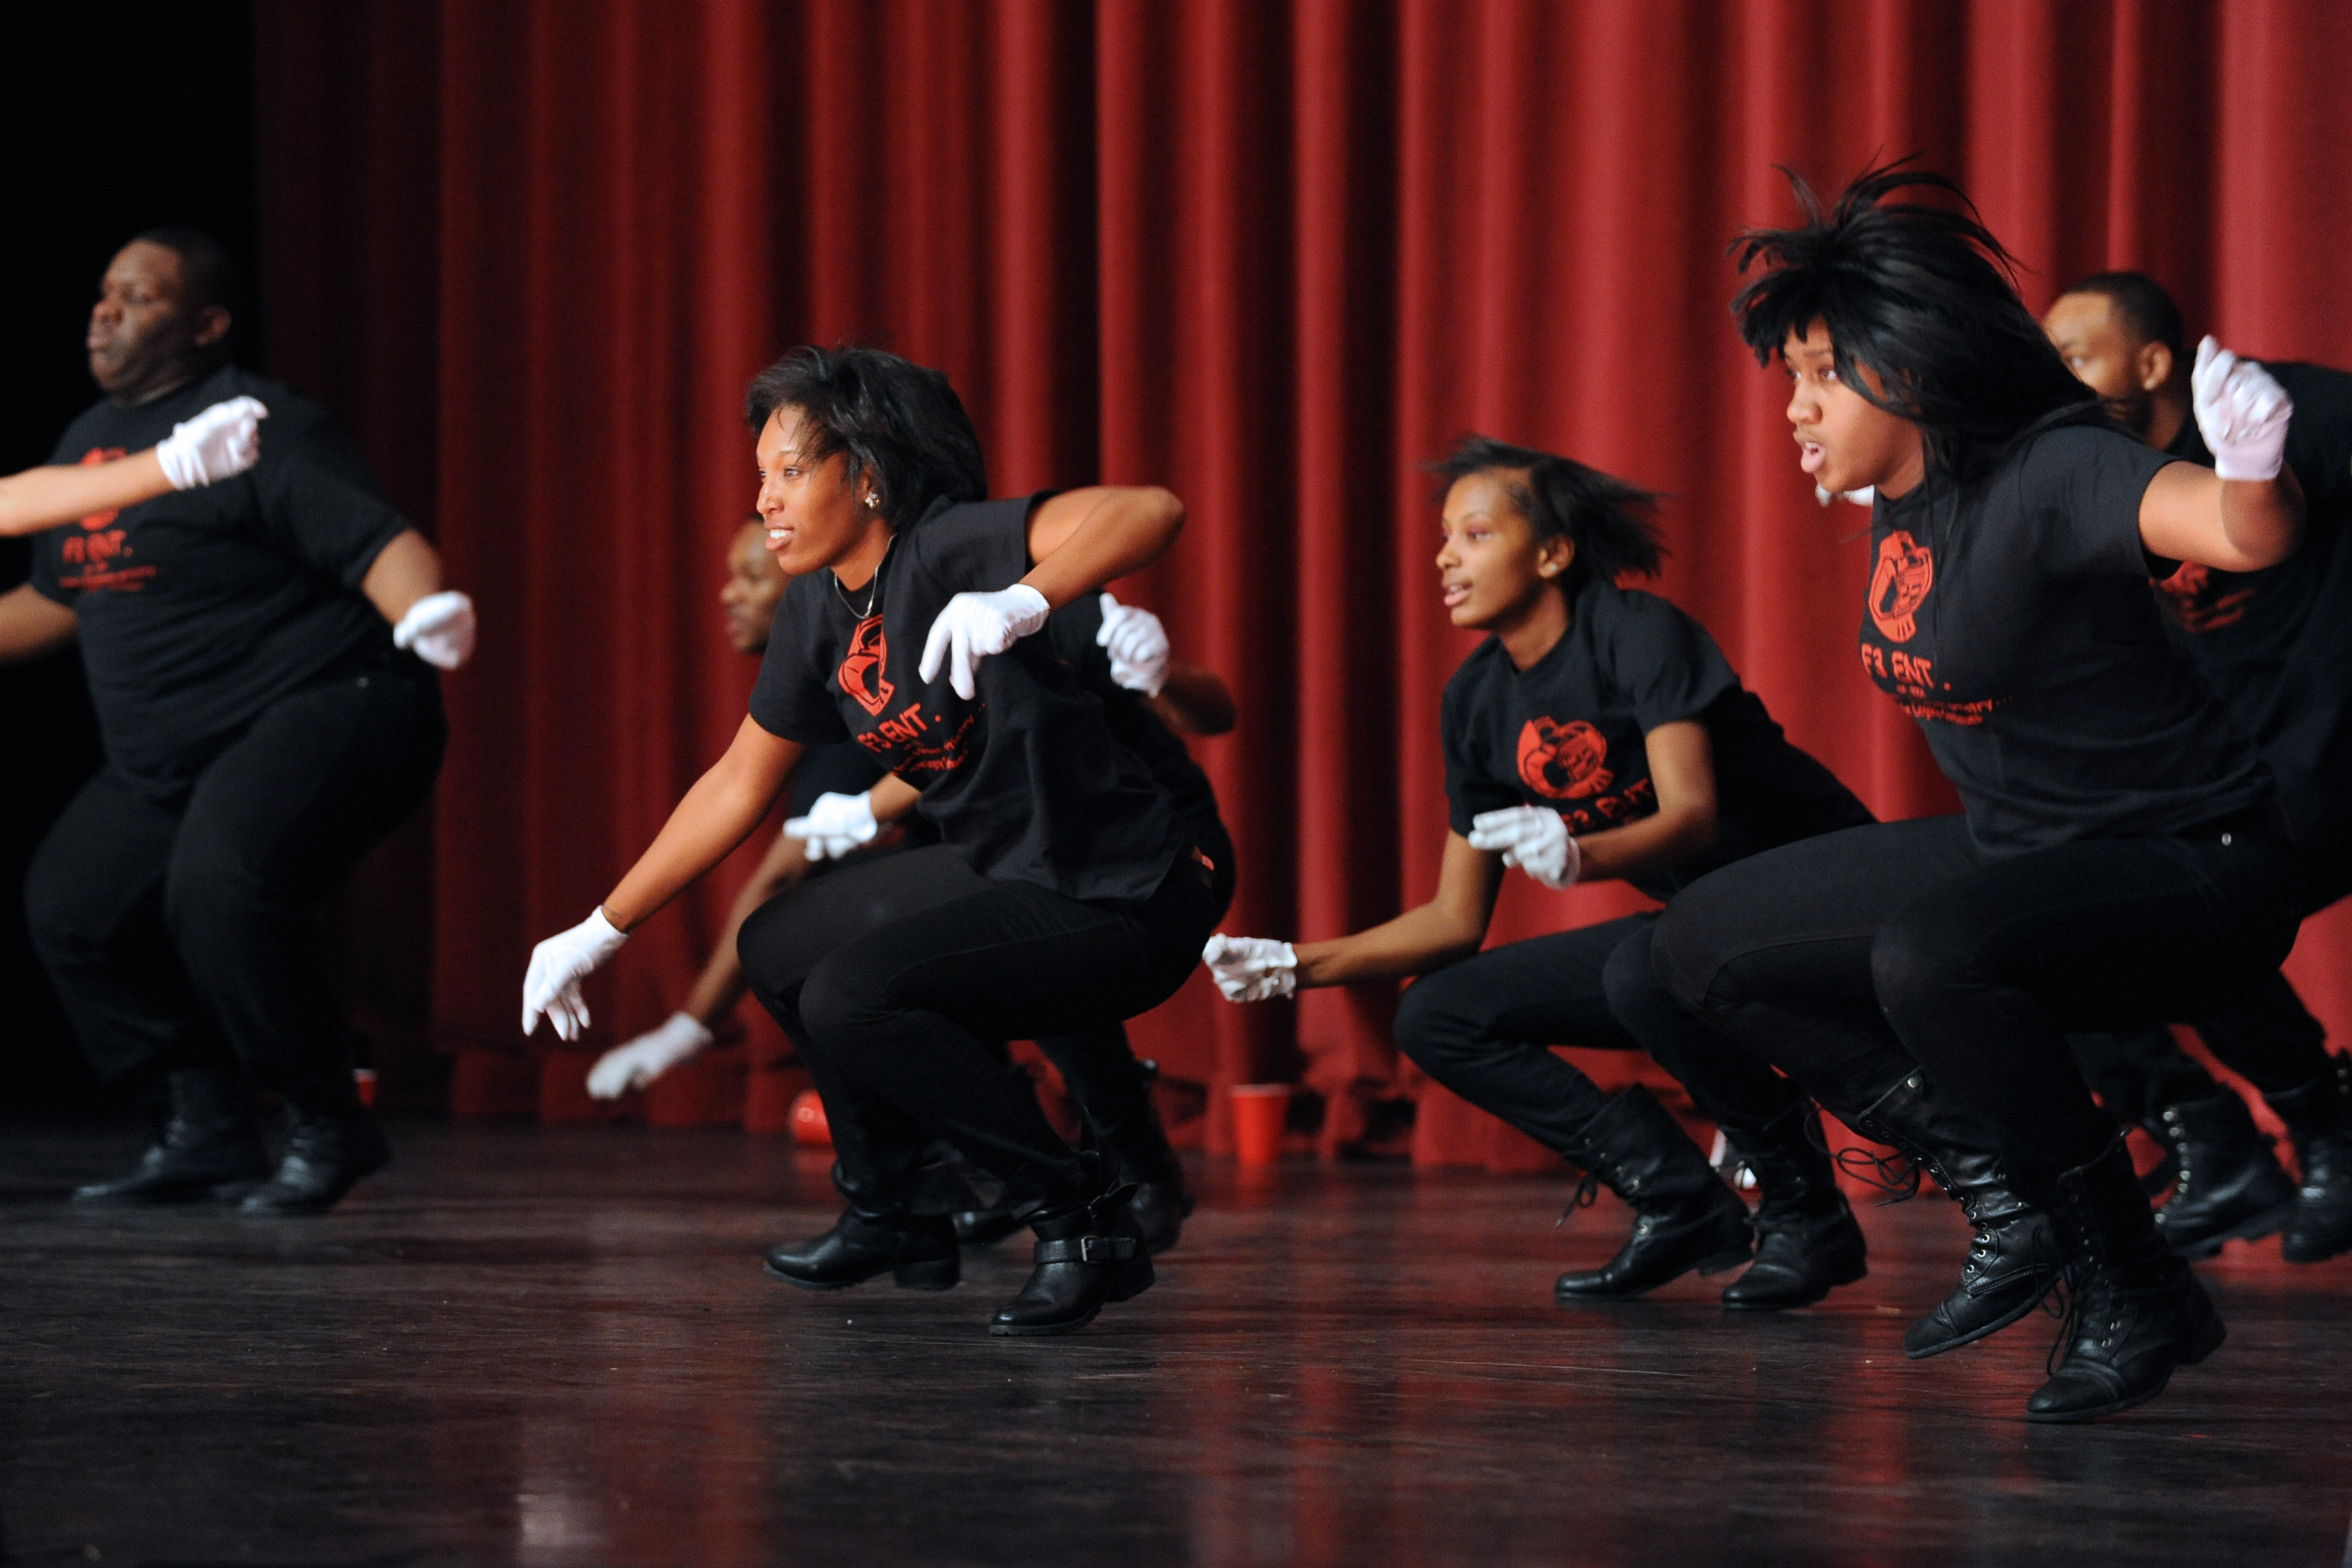 Homecoming step show, 2011; Tom Fougerousse, photographer. 